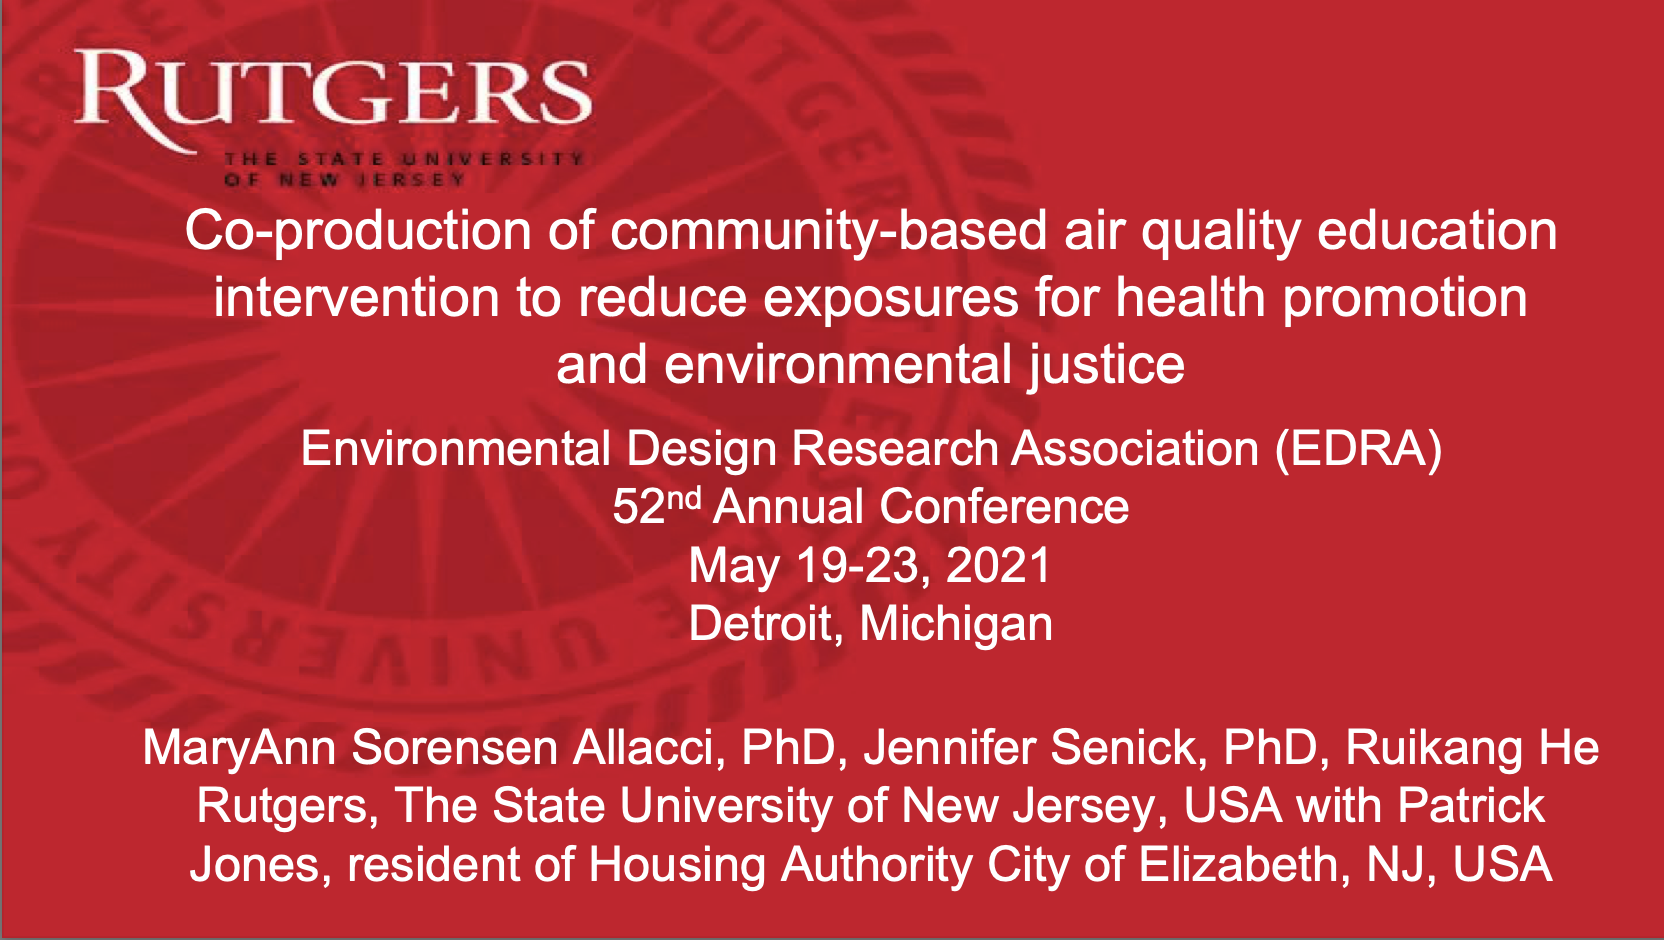 Co-production of Community-based Air Quality Education Intervention to Reduce Exposures for Health Promotion and Environmental Justice